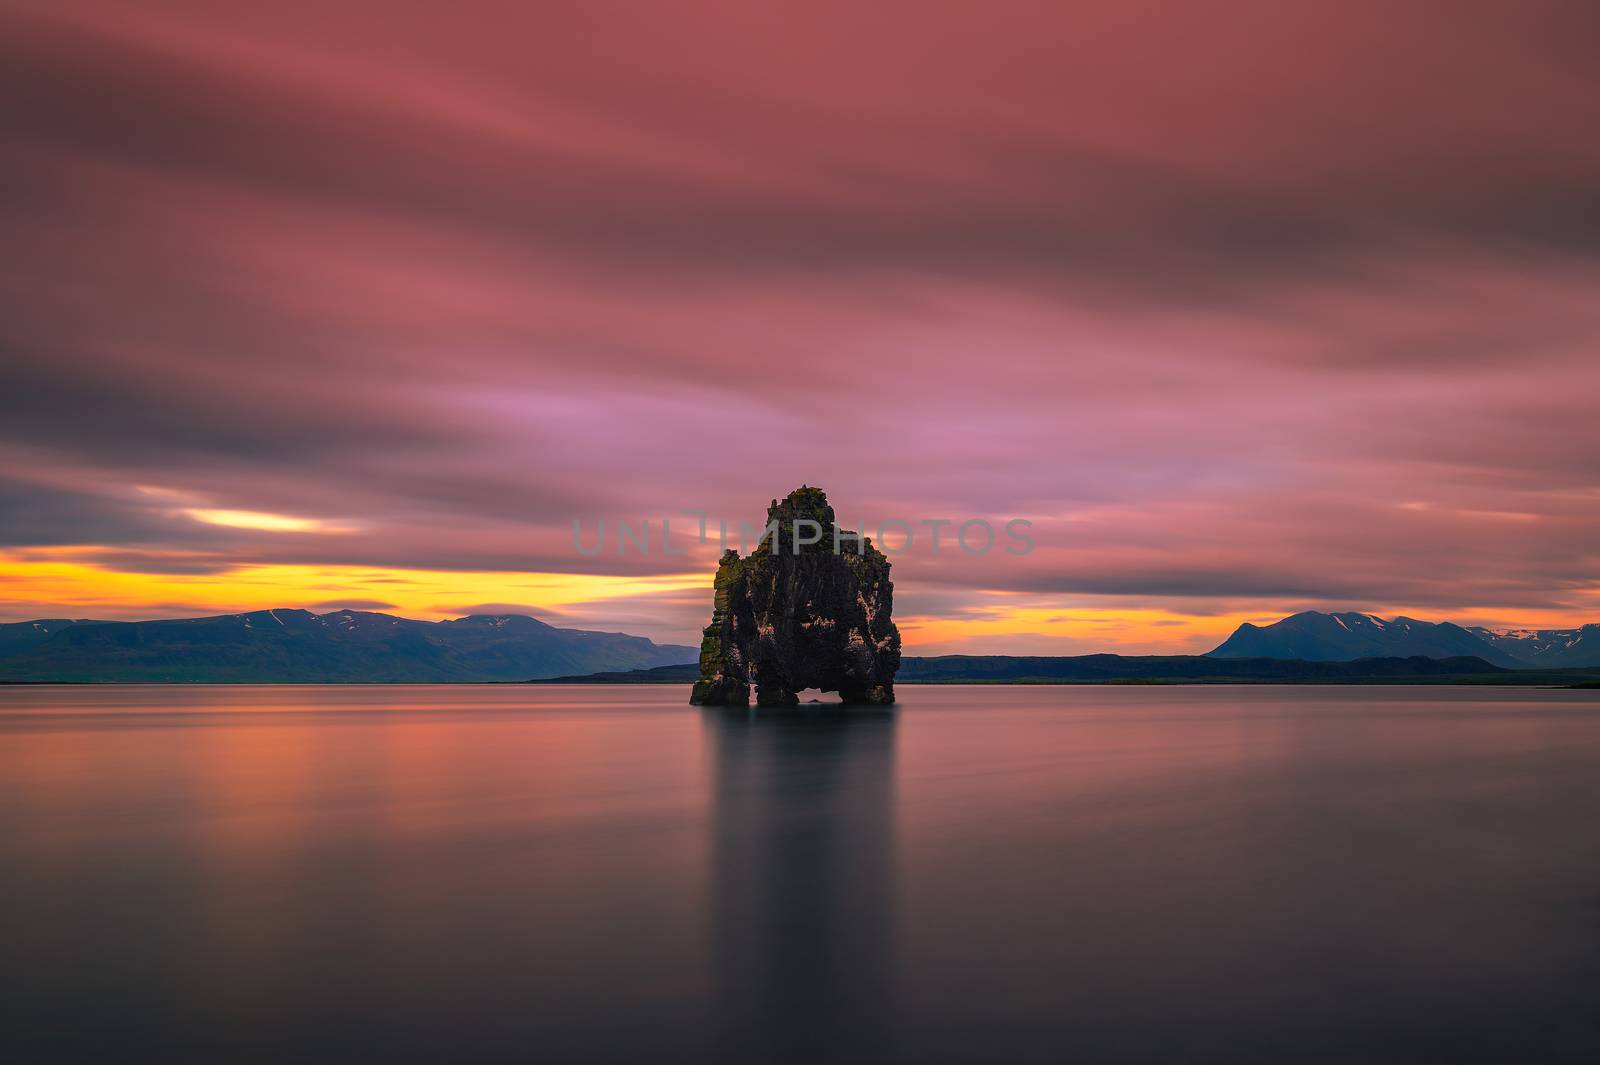 Colorful sunset at the Hvitserkur basalt stack in northern Iceland. Hvitserkur is a spectacular rock in a shape of a dragon or dinosaur drinking water from the ocean. Long exposure.